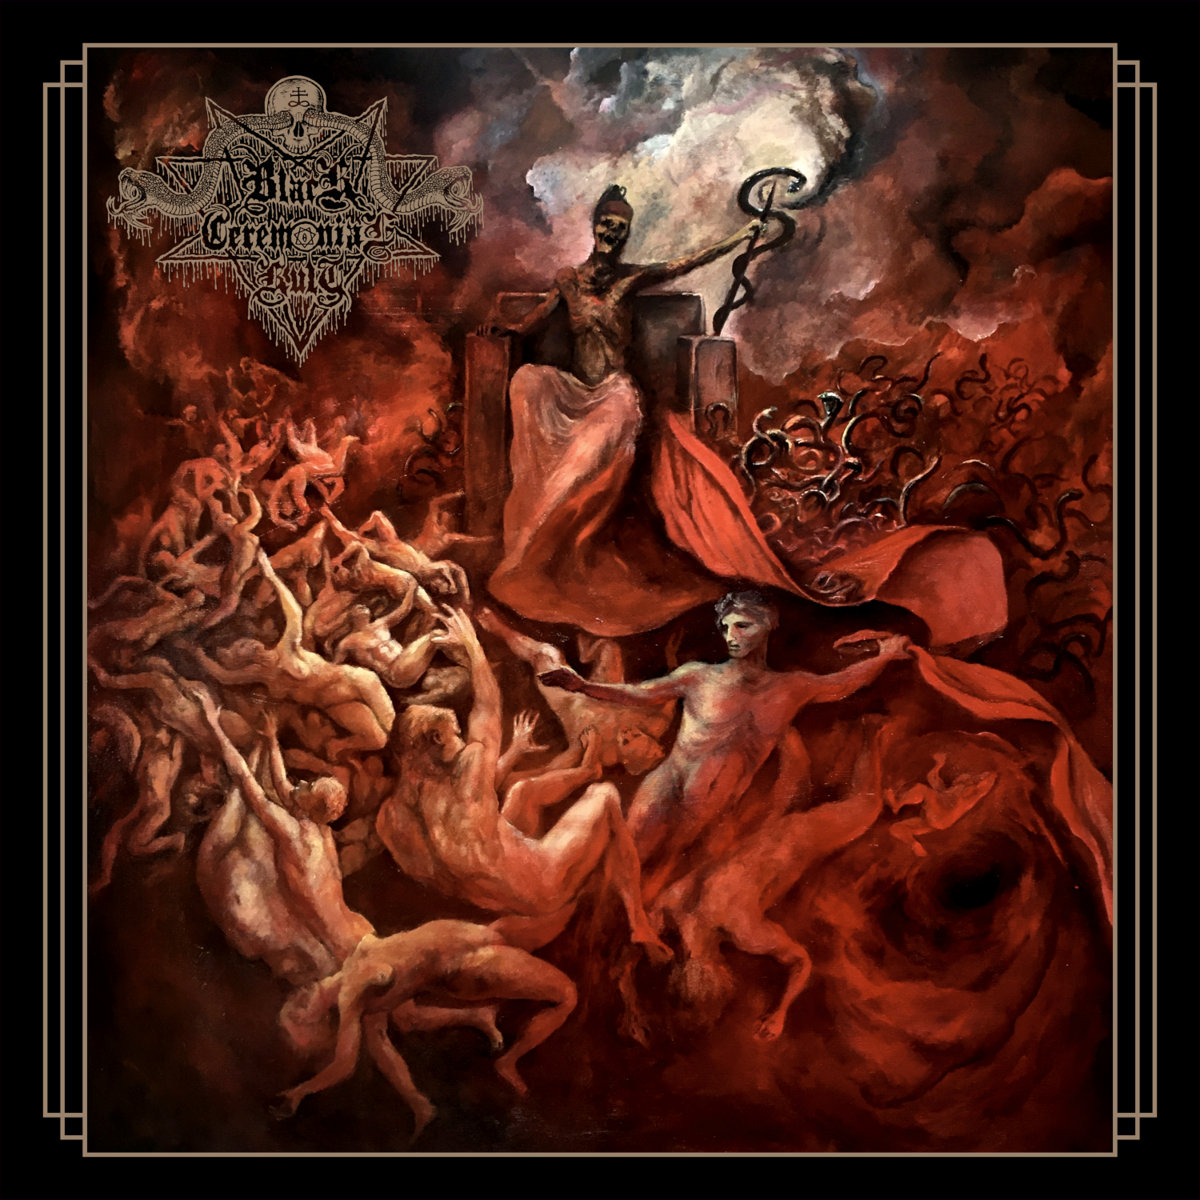 Black Ceremonial Kult - Crowned in Chaos (Limited Marbled Vinyl)